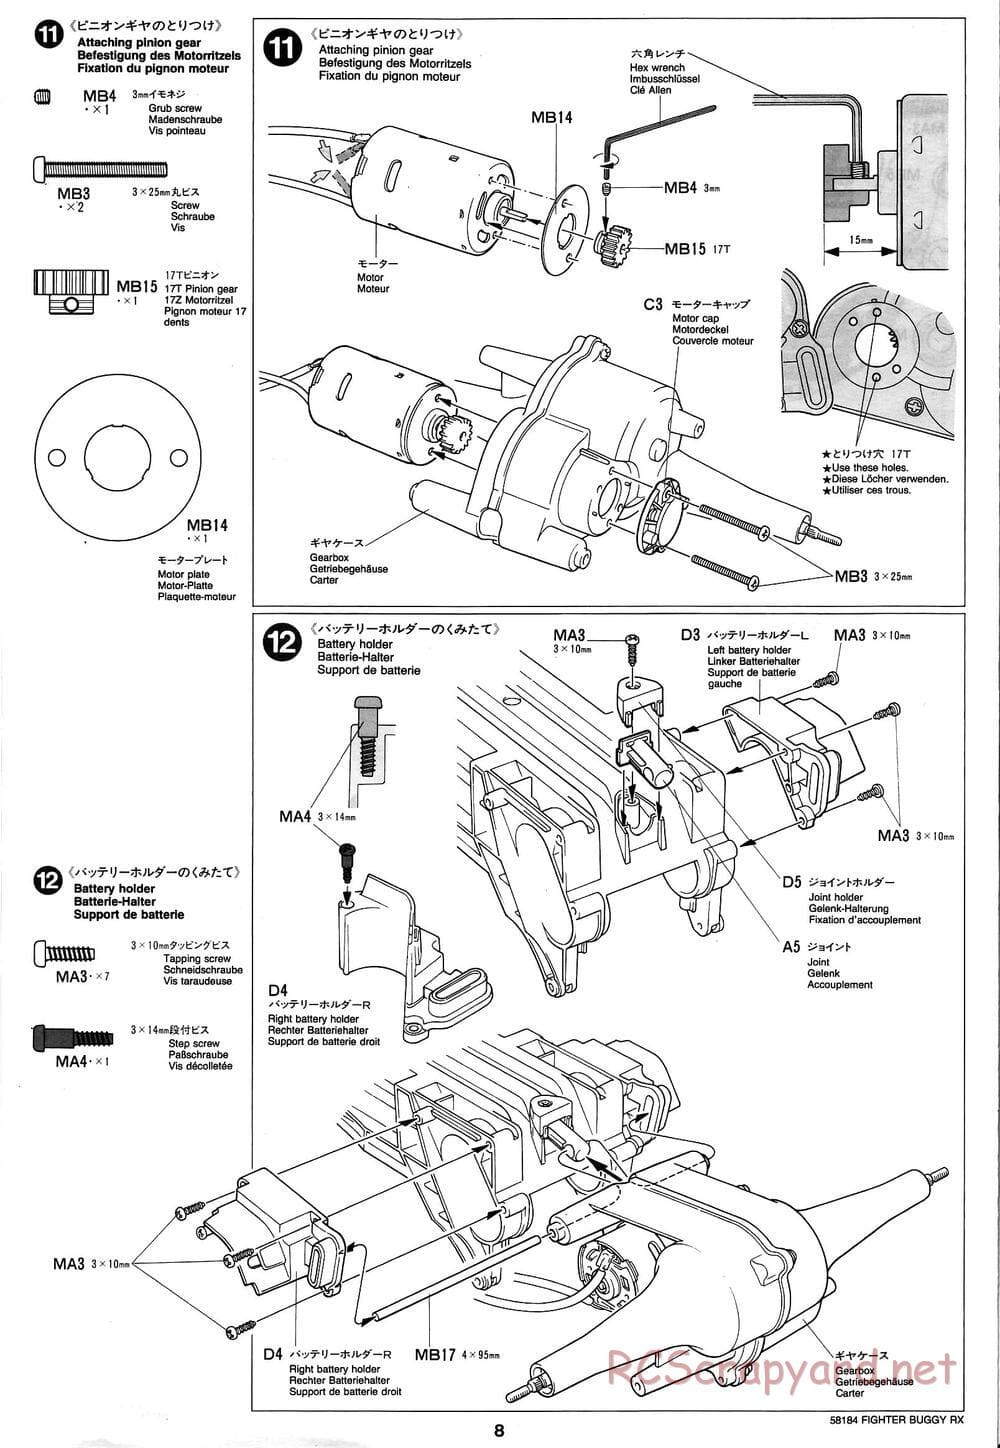 Tamiya - Fighter Buggy RX Chassis - Manual - Page 8